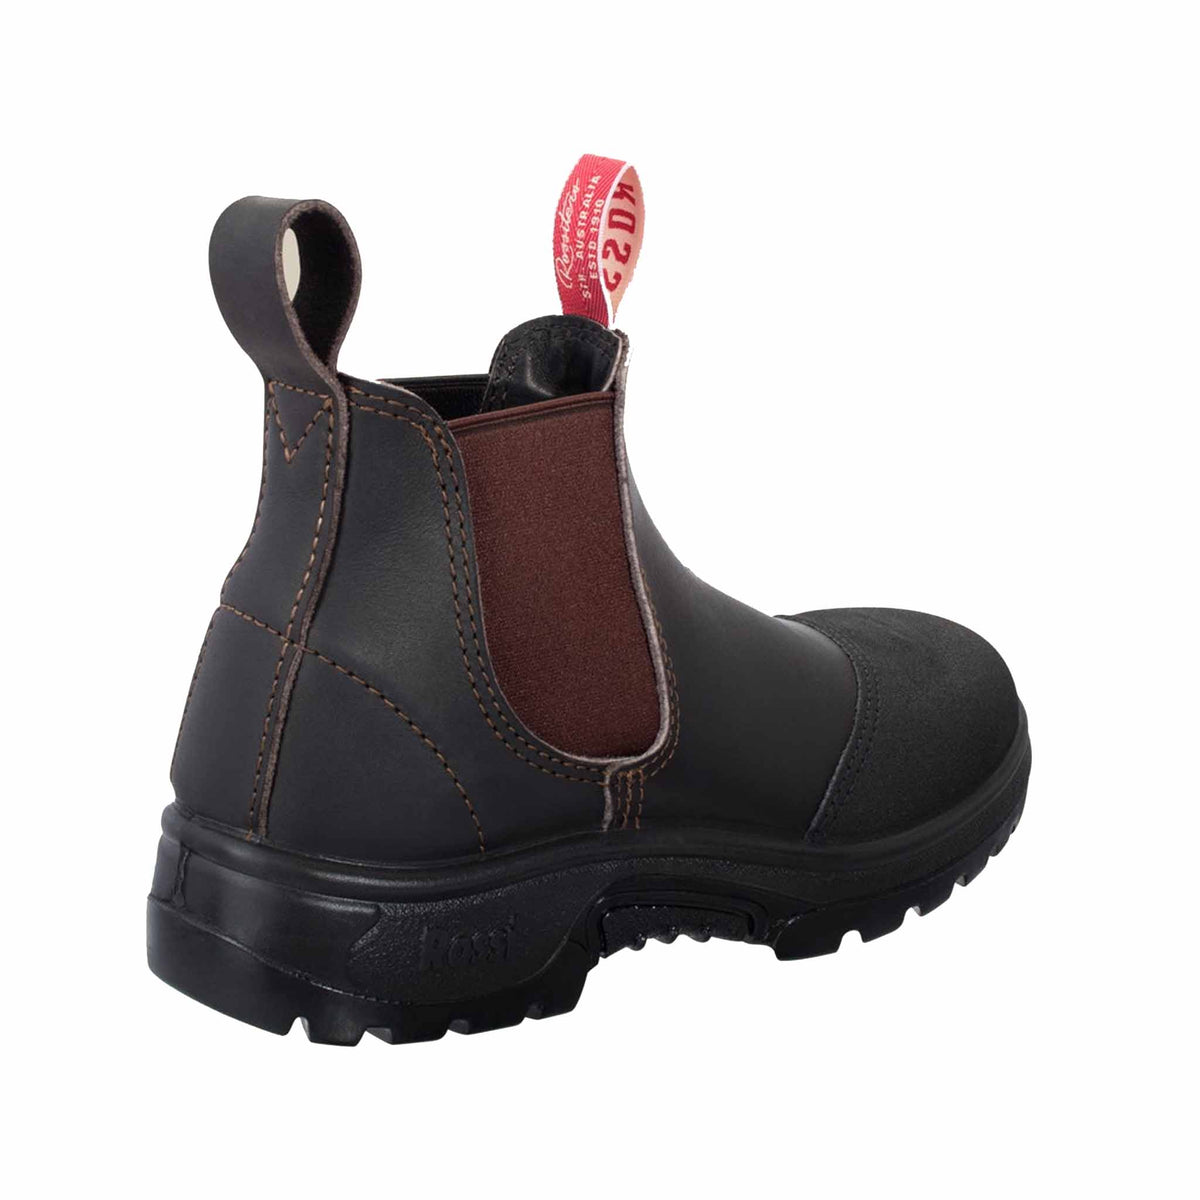 hercules safety boot in brown